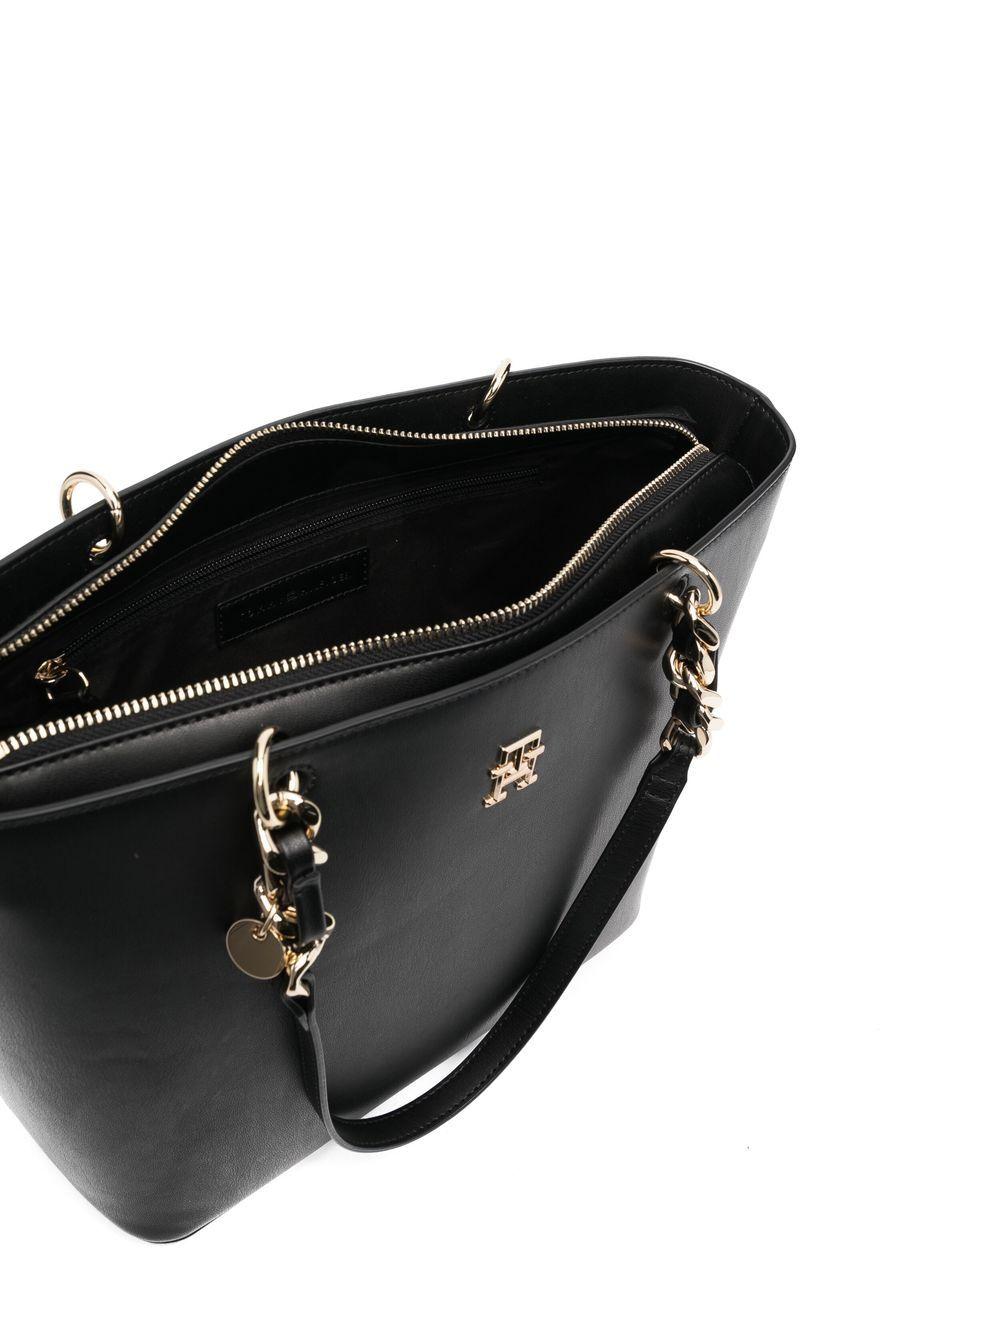 Tommy Hilfiger Chain-strap Tote Bag in Black | Lyst